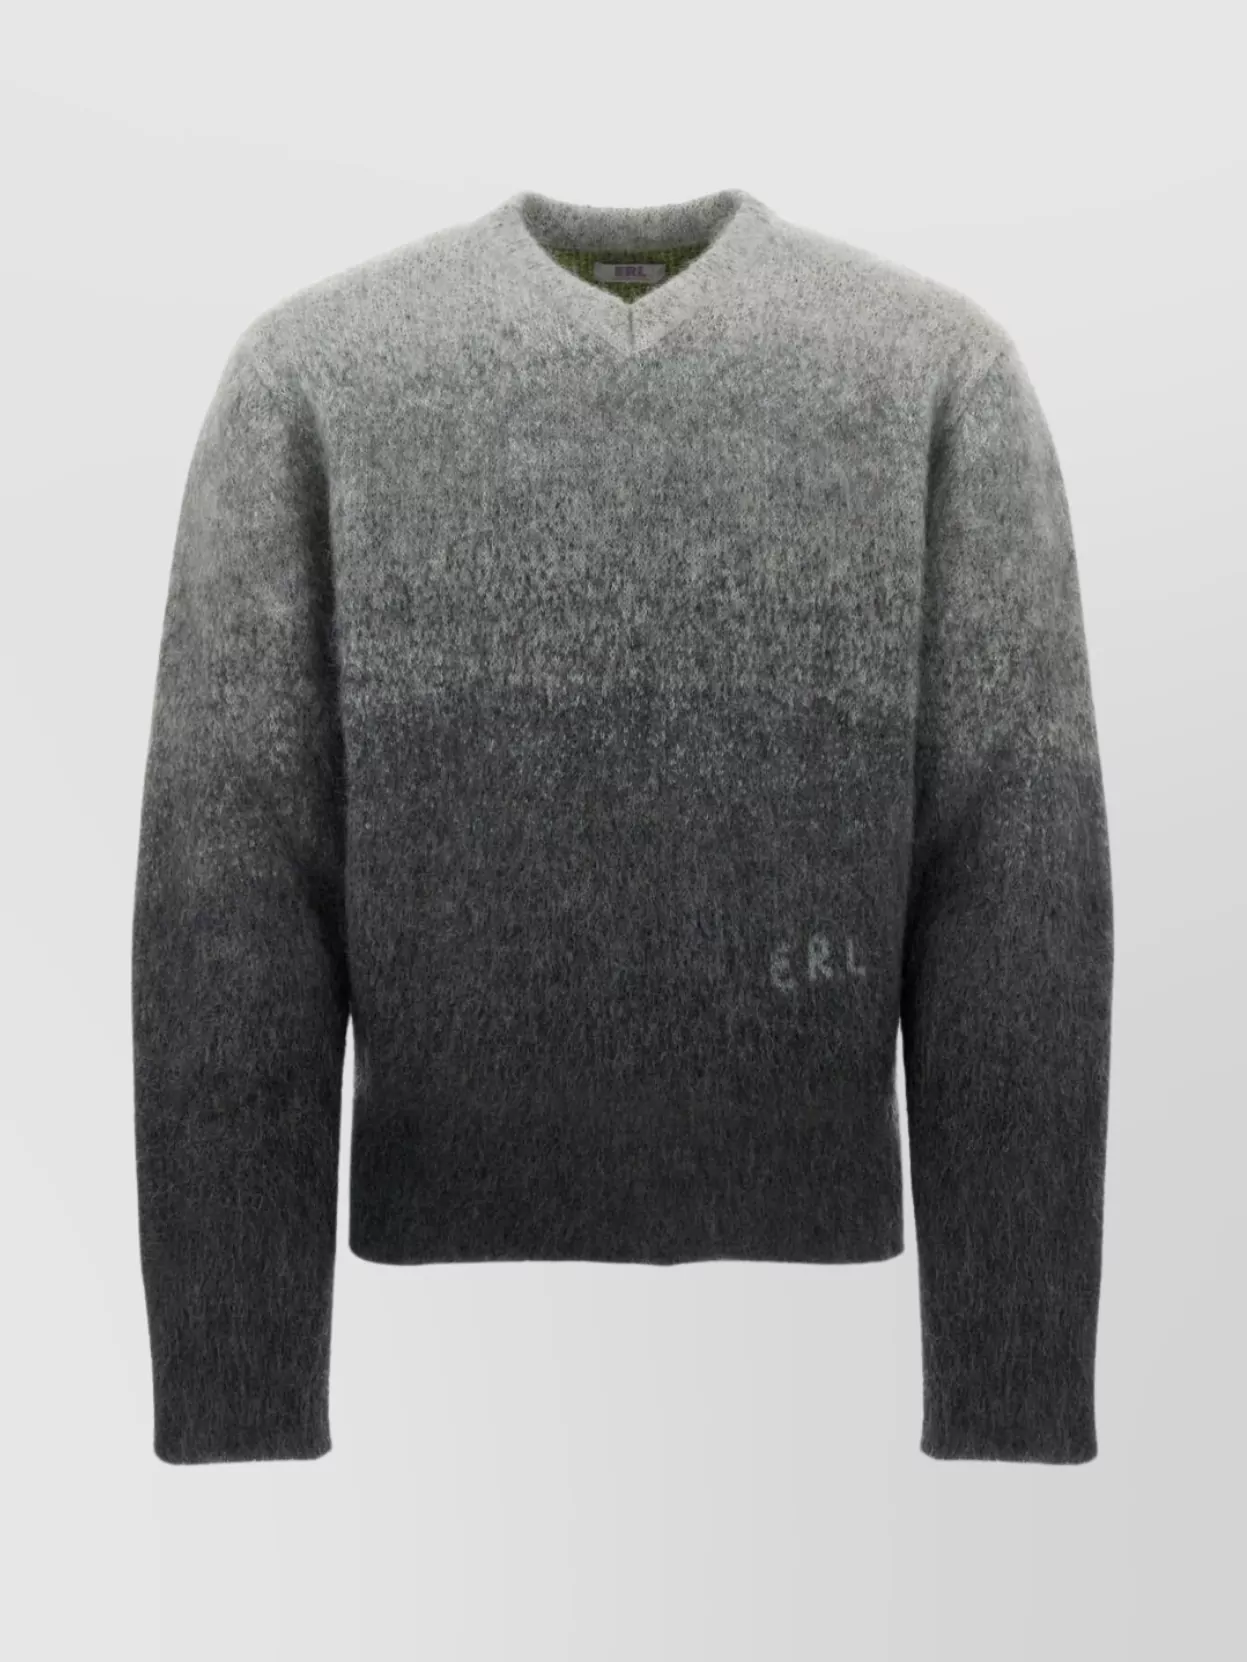 Erl Crew Neck Mohair Blend Sweater In Gray